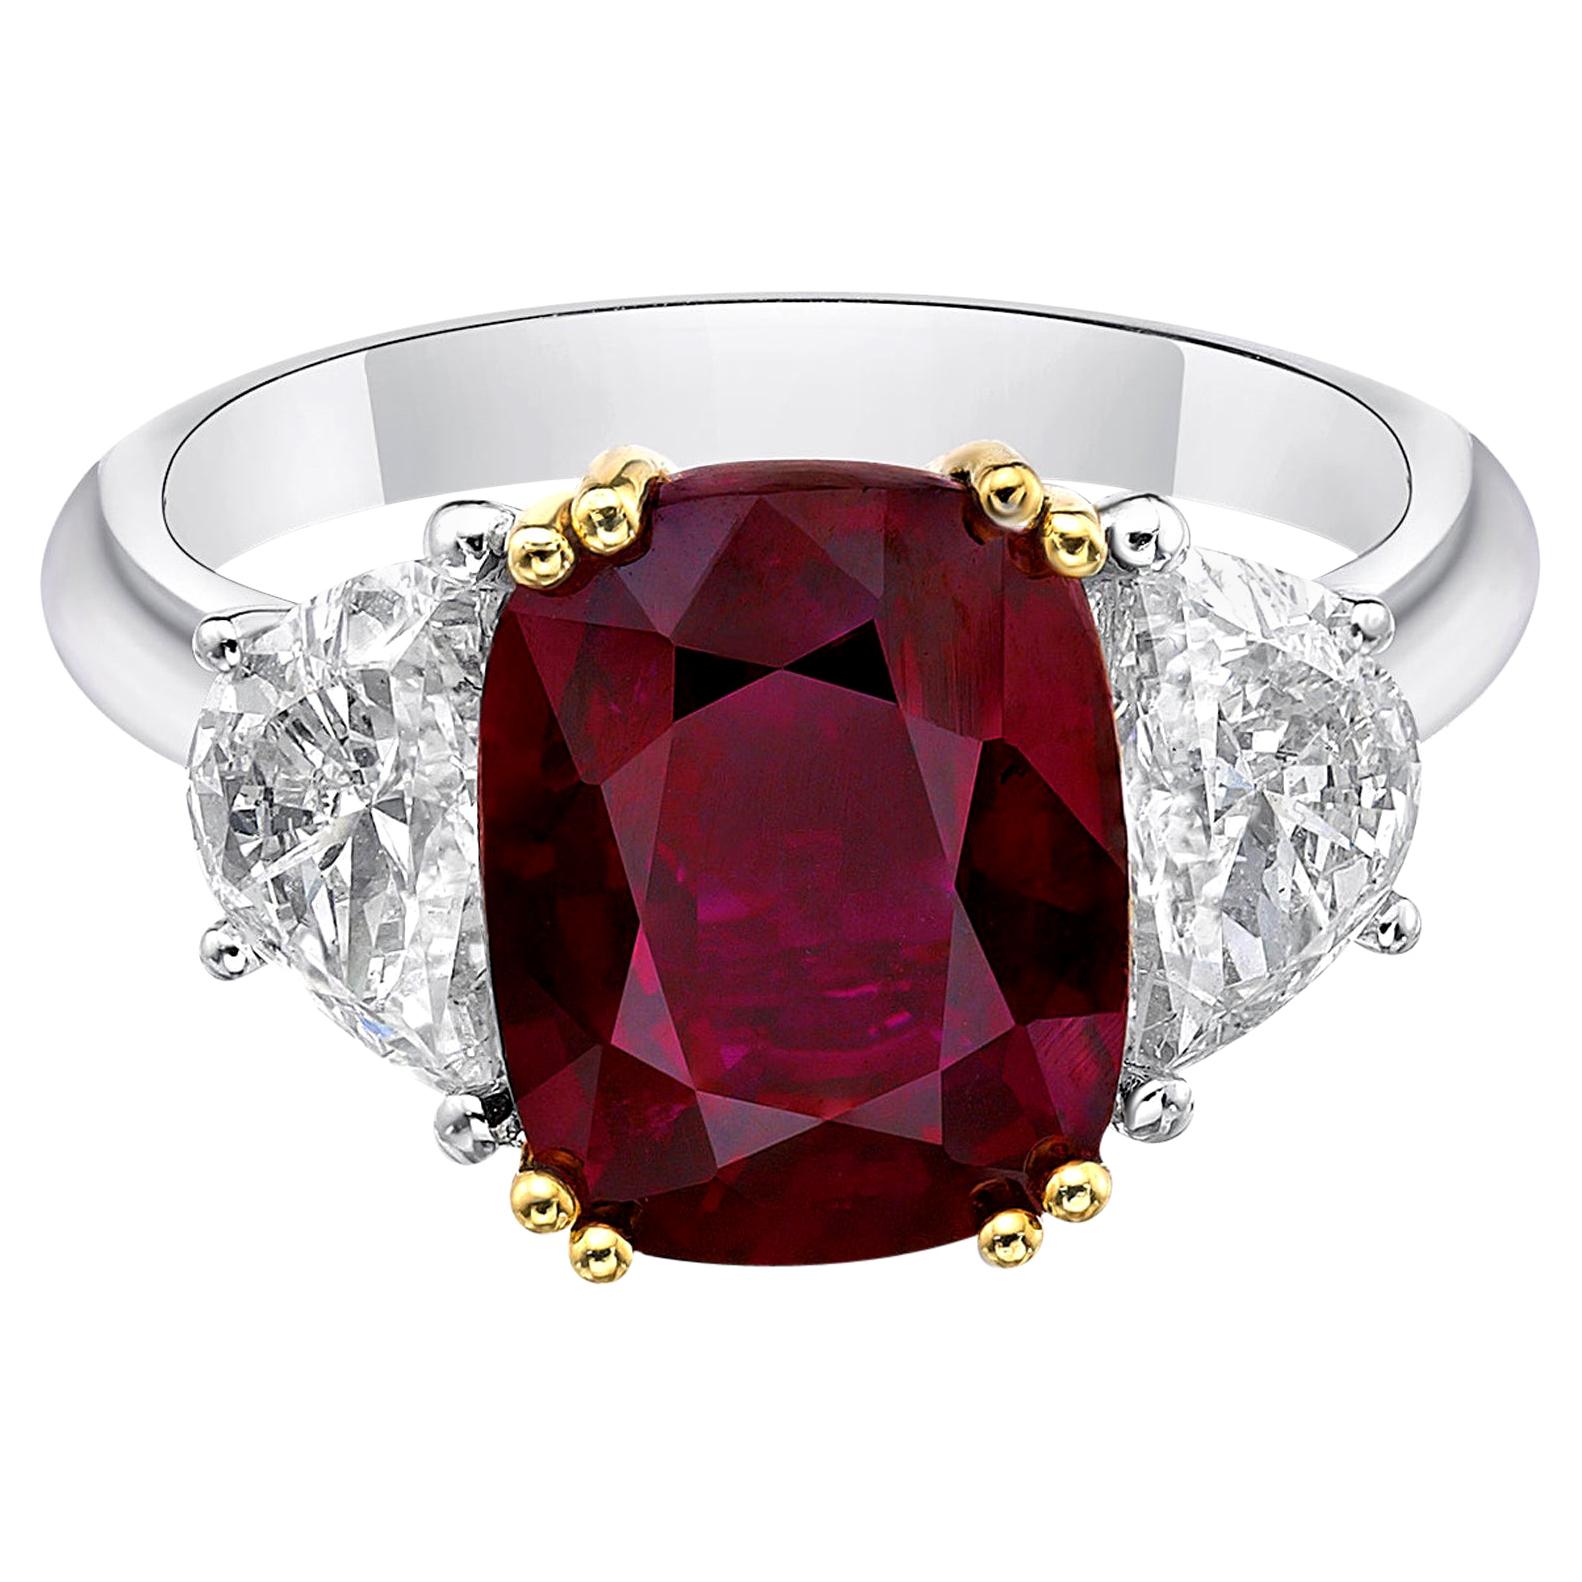 4.58 Carat Vivid Pigeon Blood Red Ruby GRS Certified Unheated Ring Cushion Cut